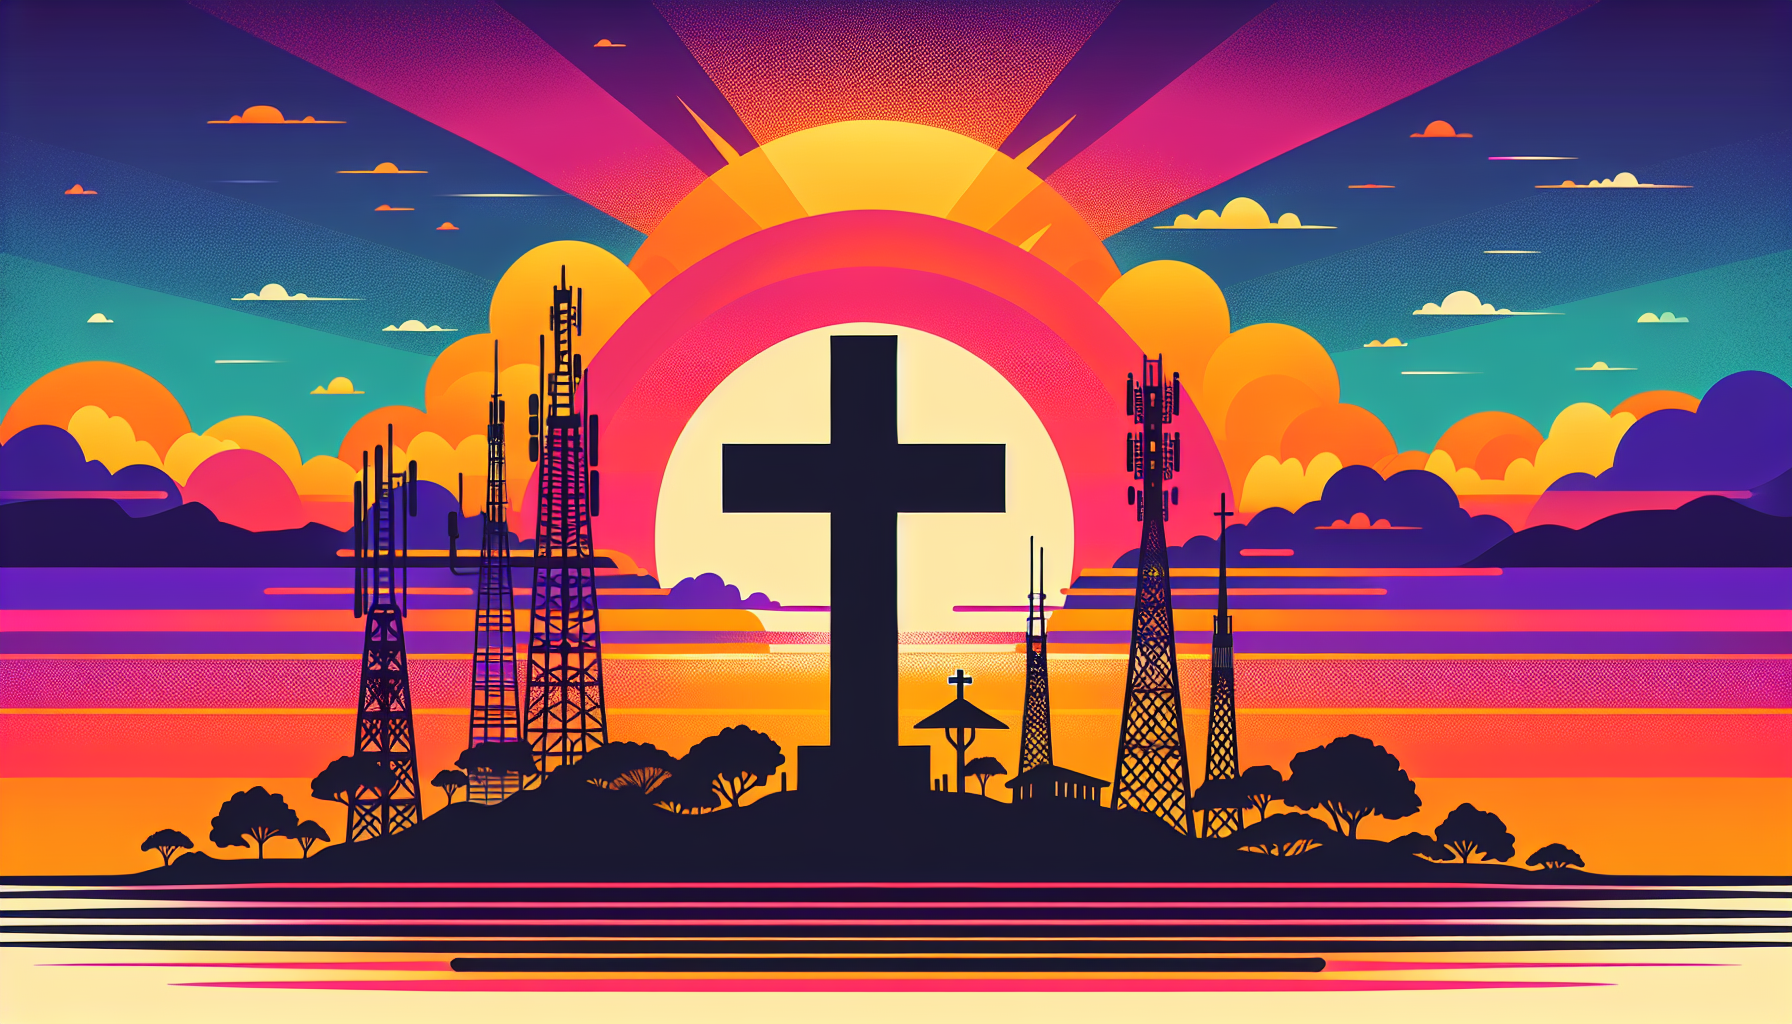 Beautiful sunset landscape of Costa Rica with silhouette of a large cross and radio towers in the background, illustrating the major Christian radio stations in the region.